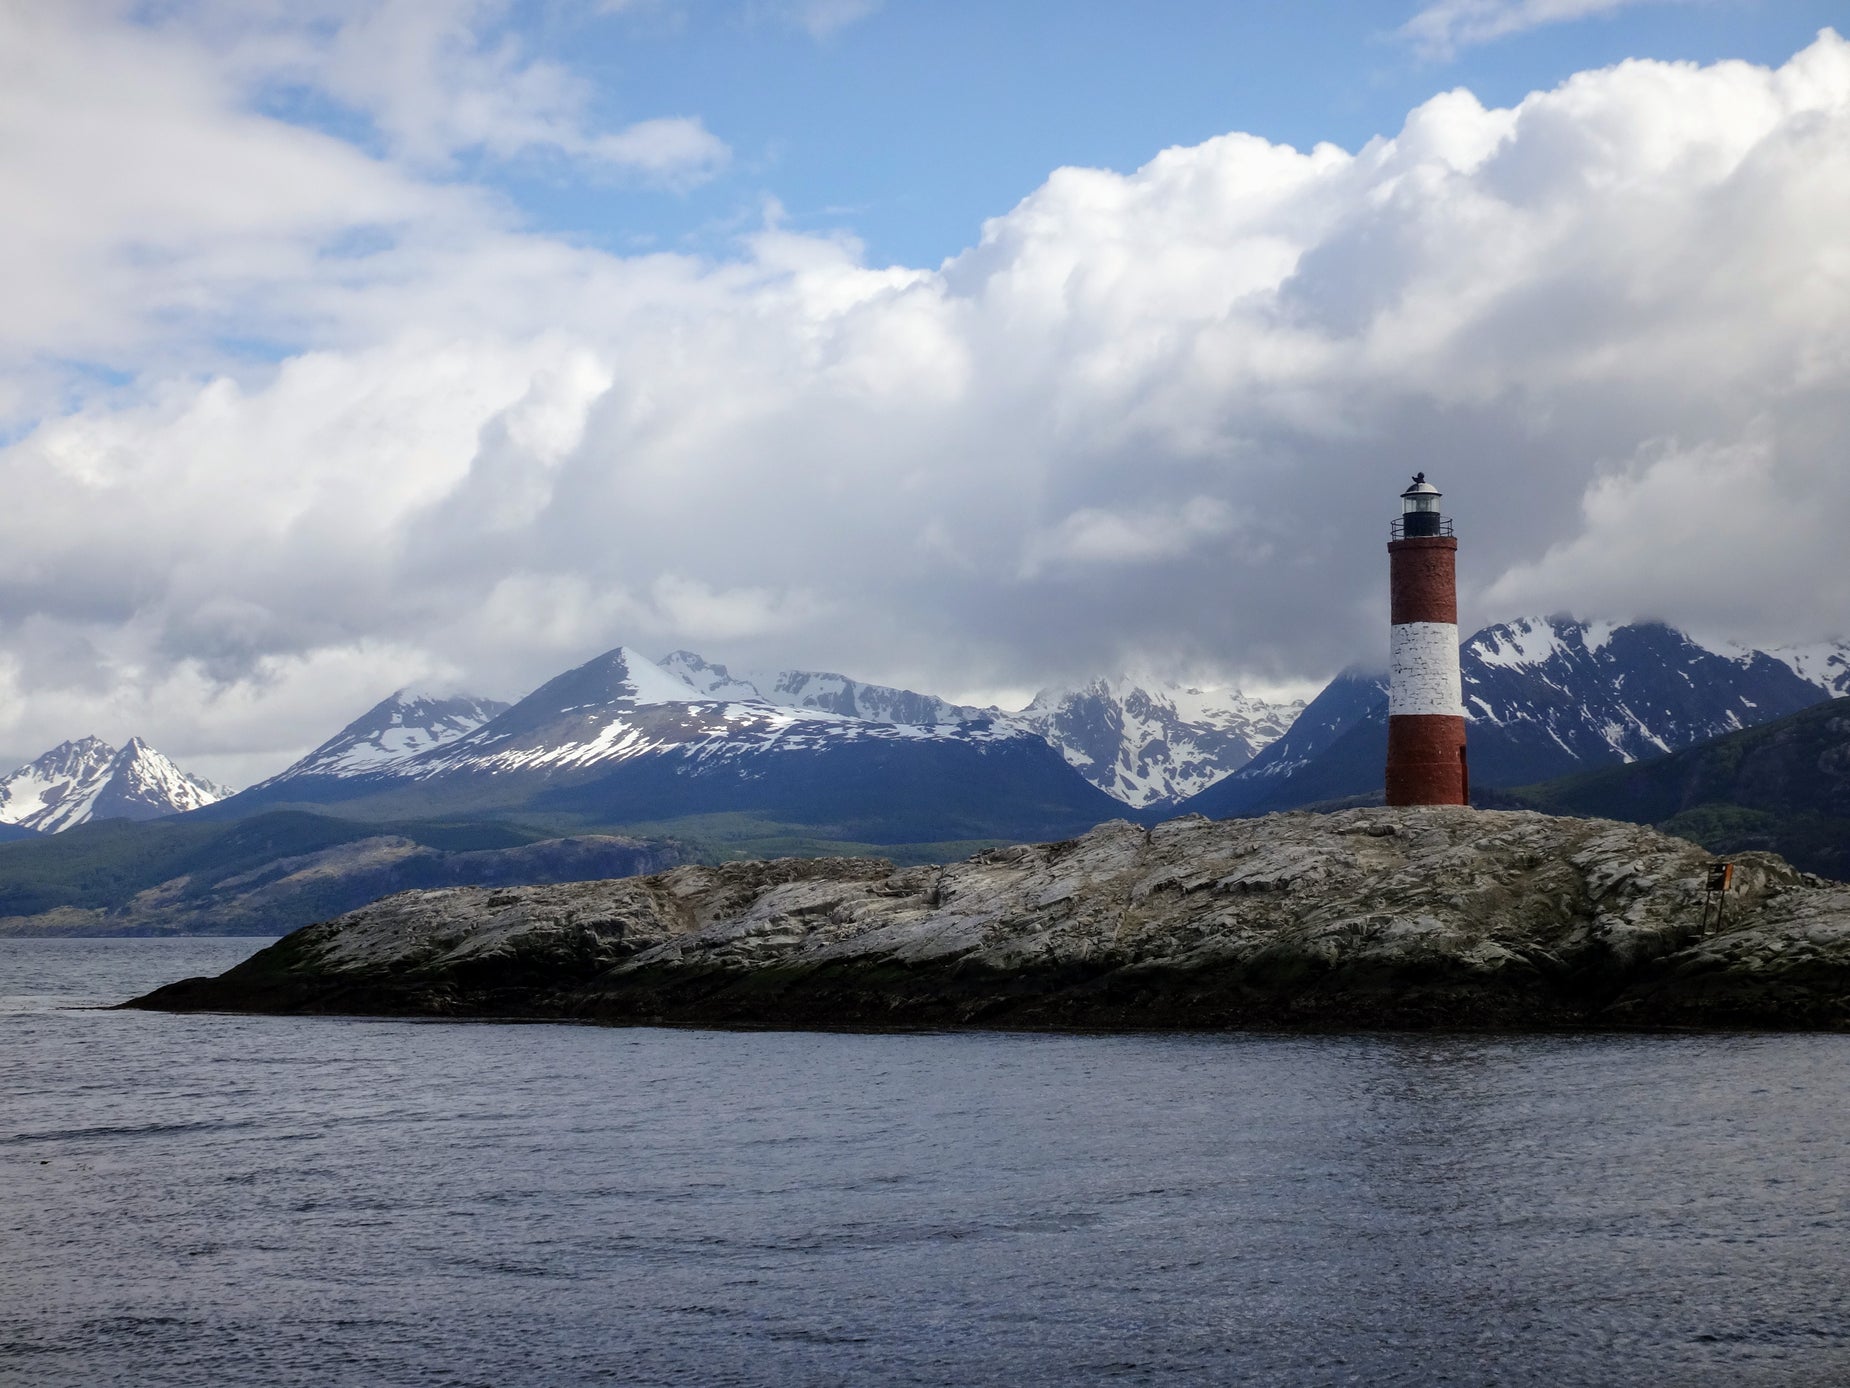 a lighthouse is shown with a mountain range in the background